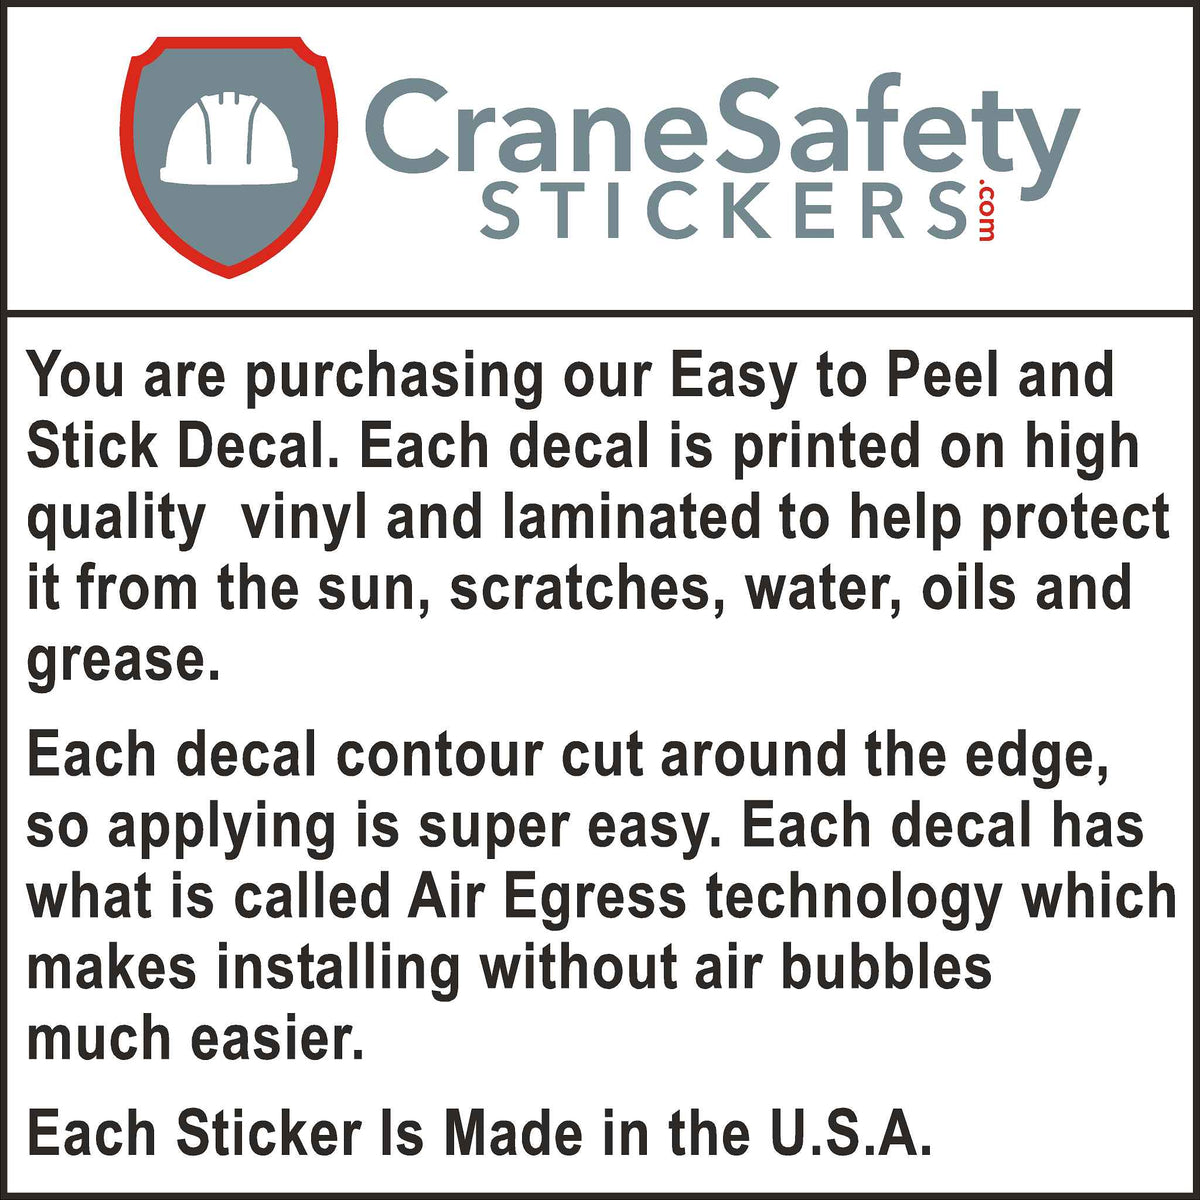 Quality of our sticker printed with a carful worker is a safe worker.